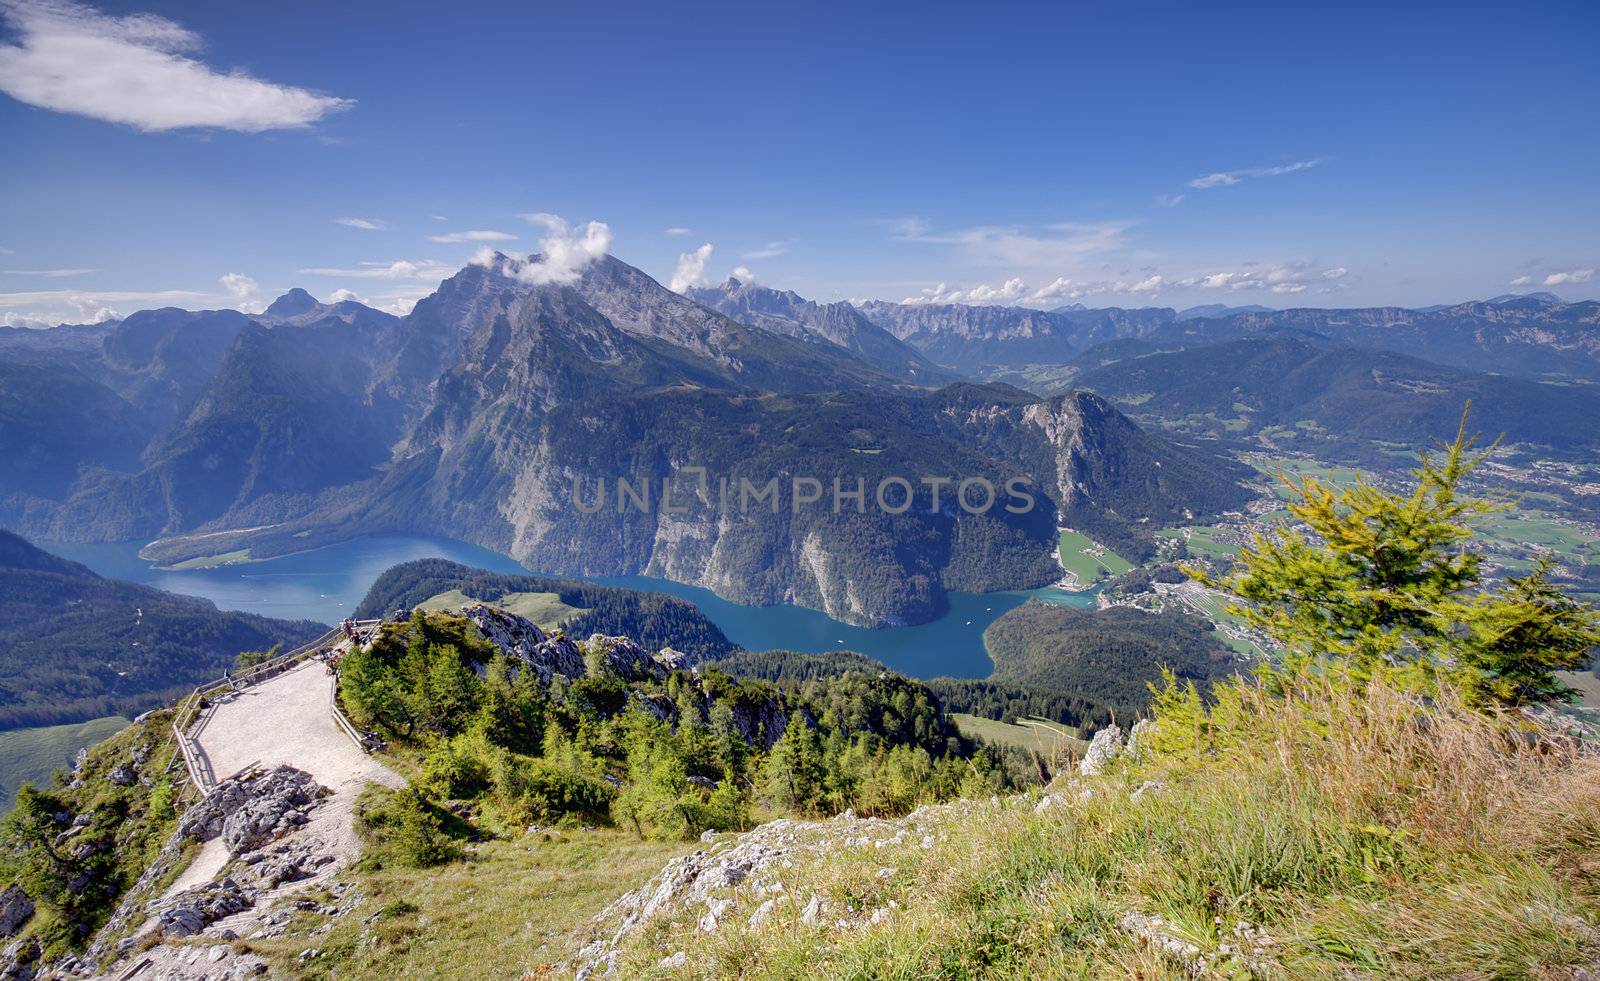 Alps mountains and Konigssee lake in Bavaria, Germany